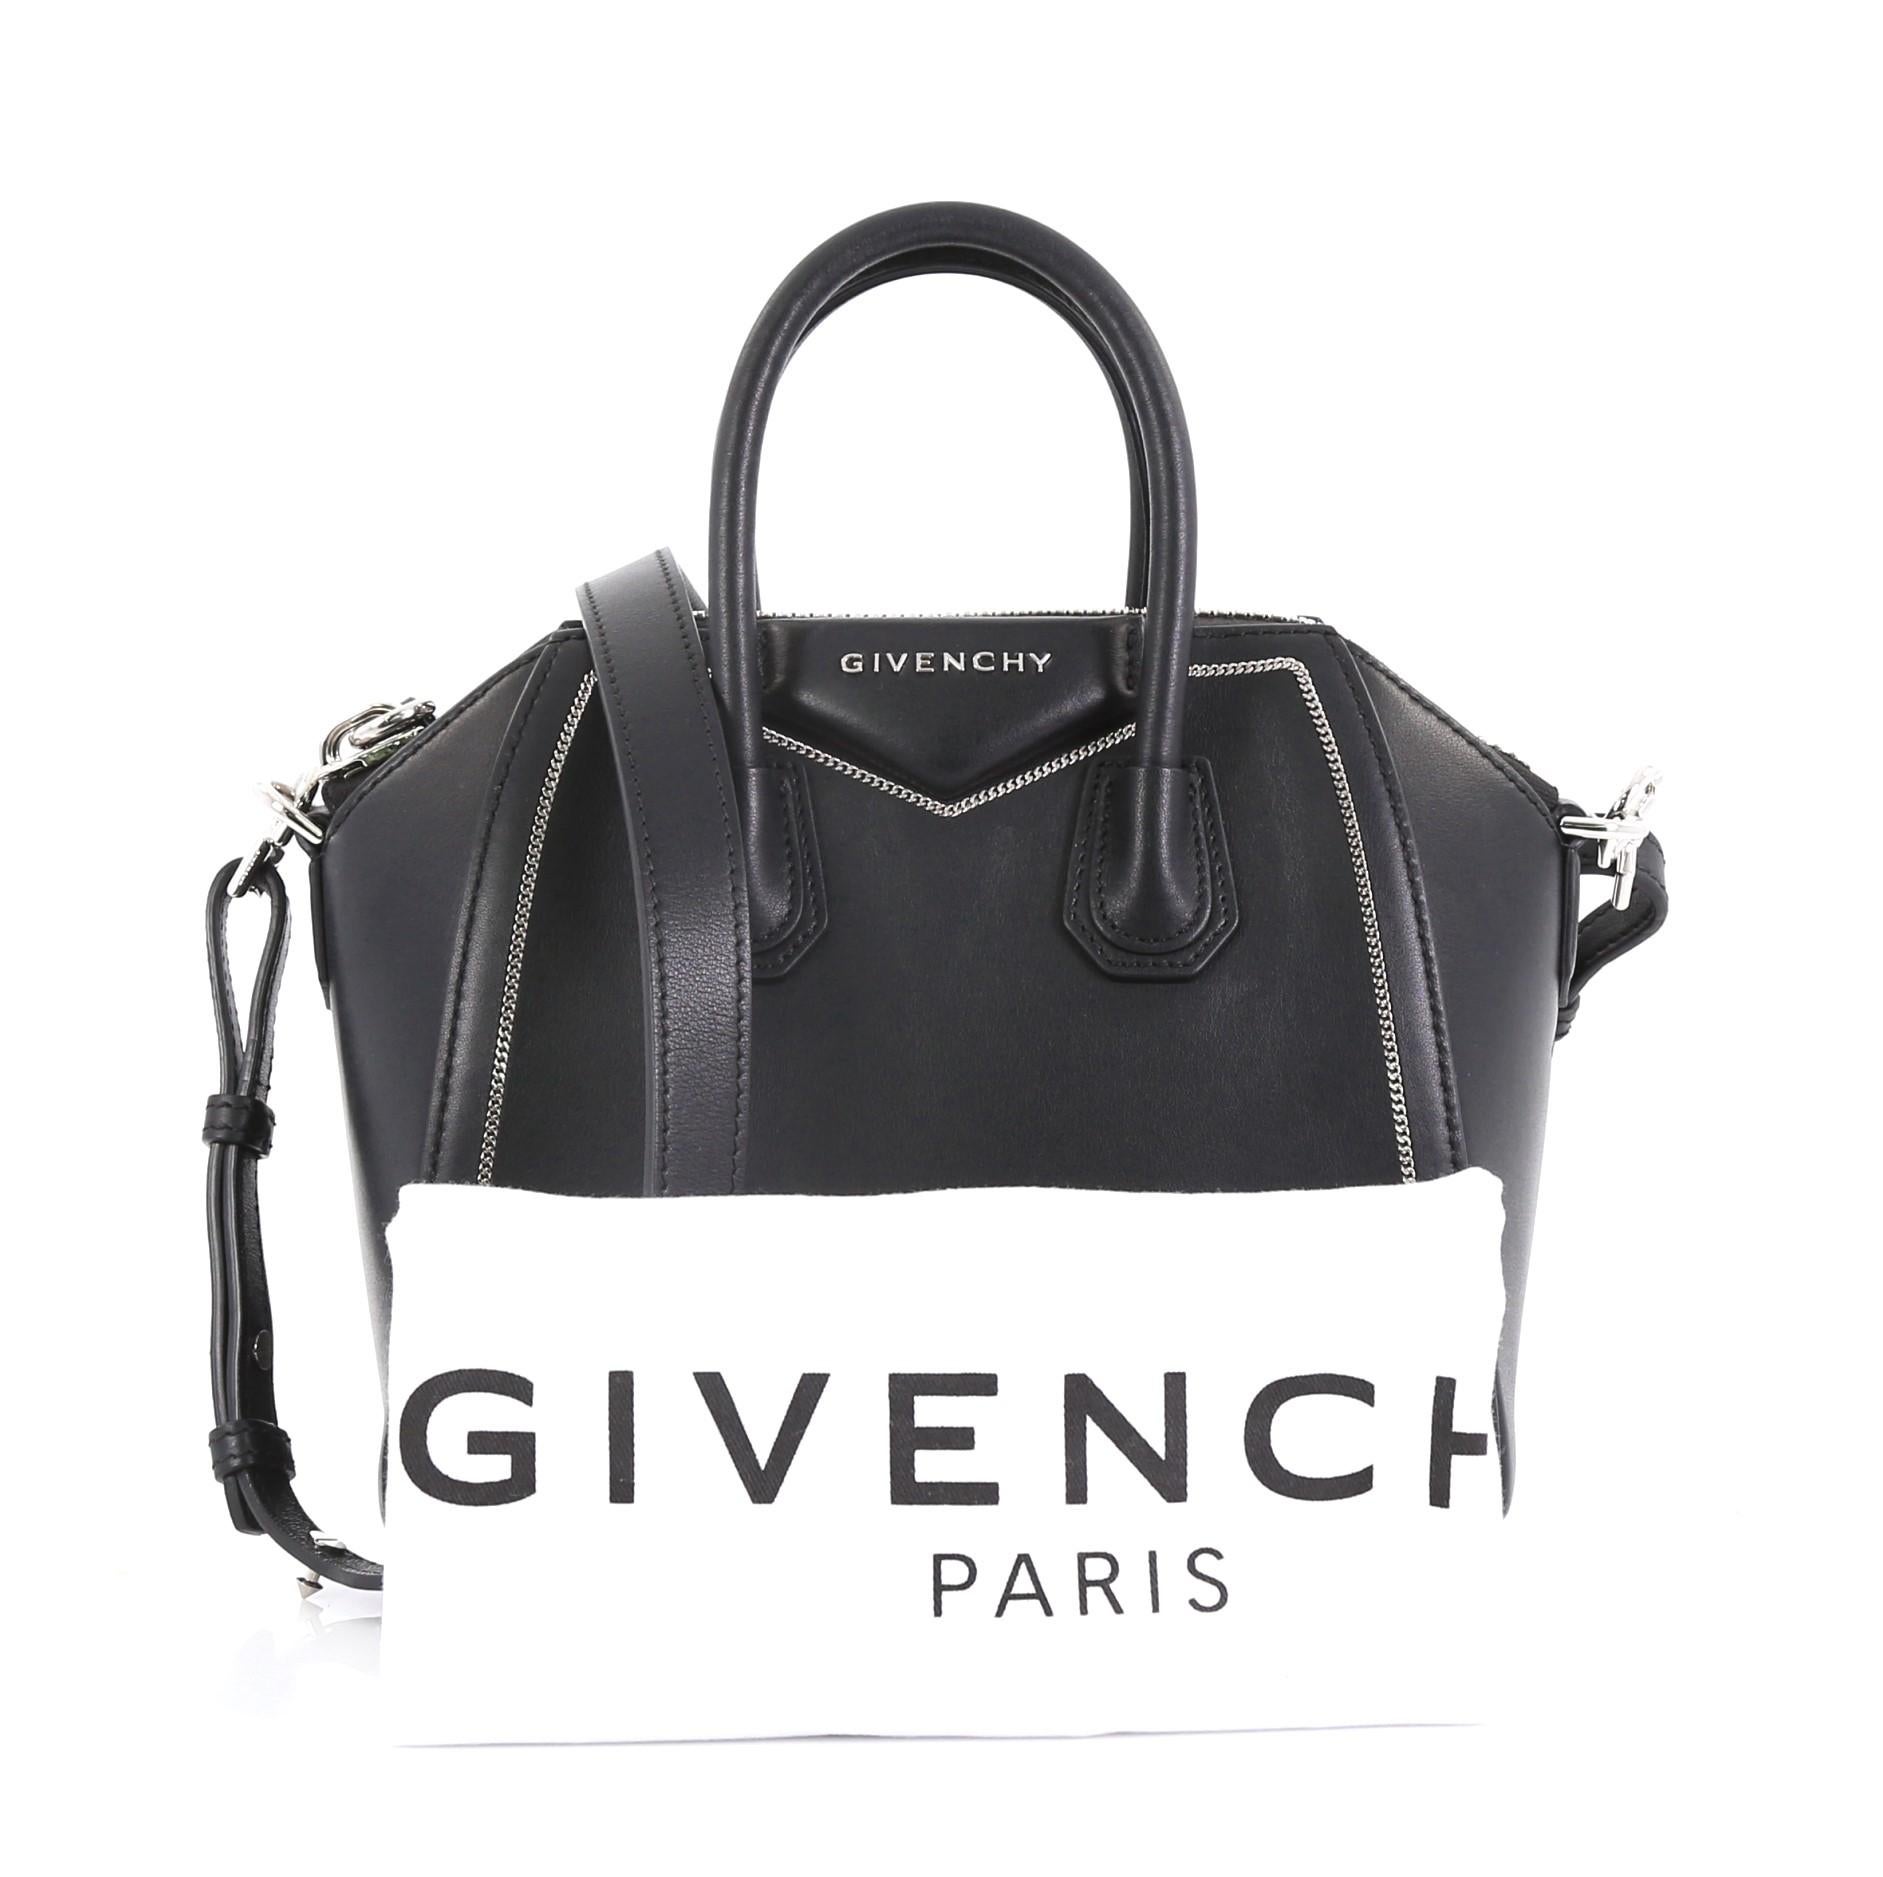 This Givenchy Antigona Bag Leather with Chain Detail Mini, crafted from black leather, features signature envelope flap detail with Givenchy logo, dual rolled leather handles, chain link detailing, and silver-tone hardware. Its zip closure opens to